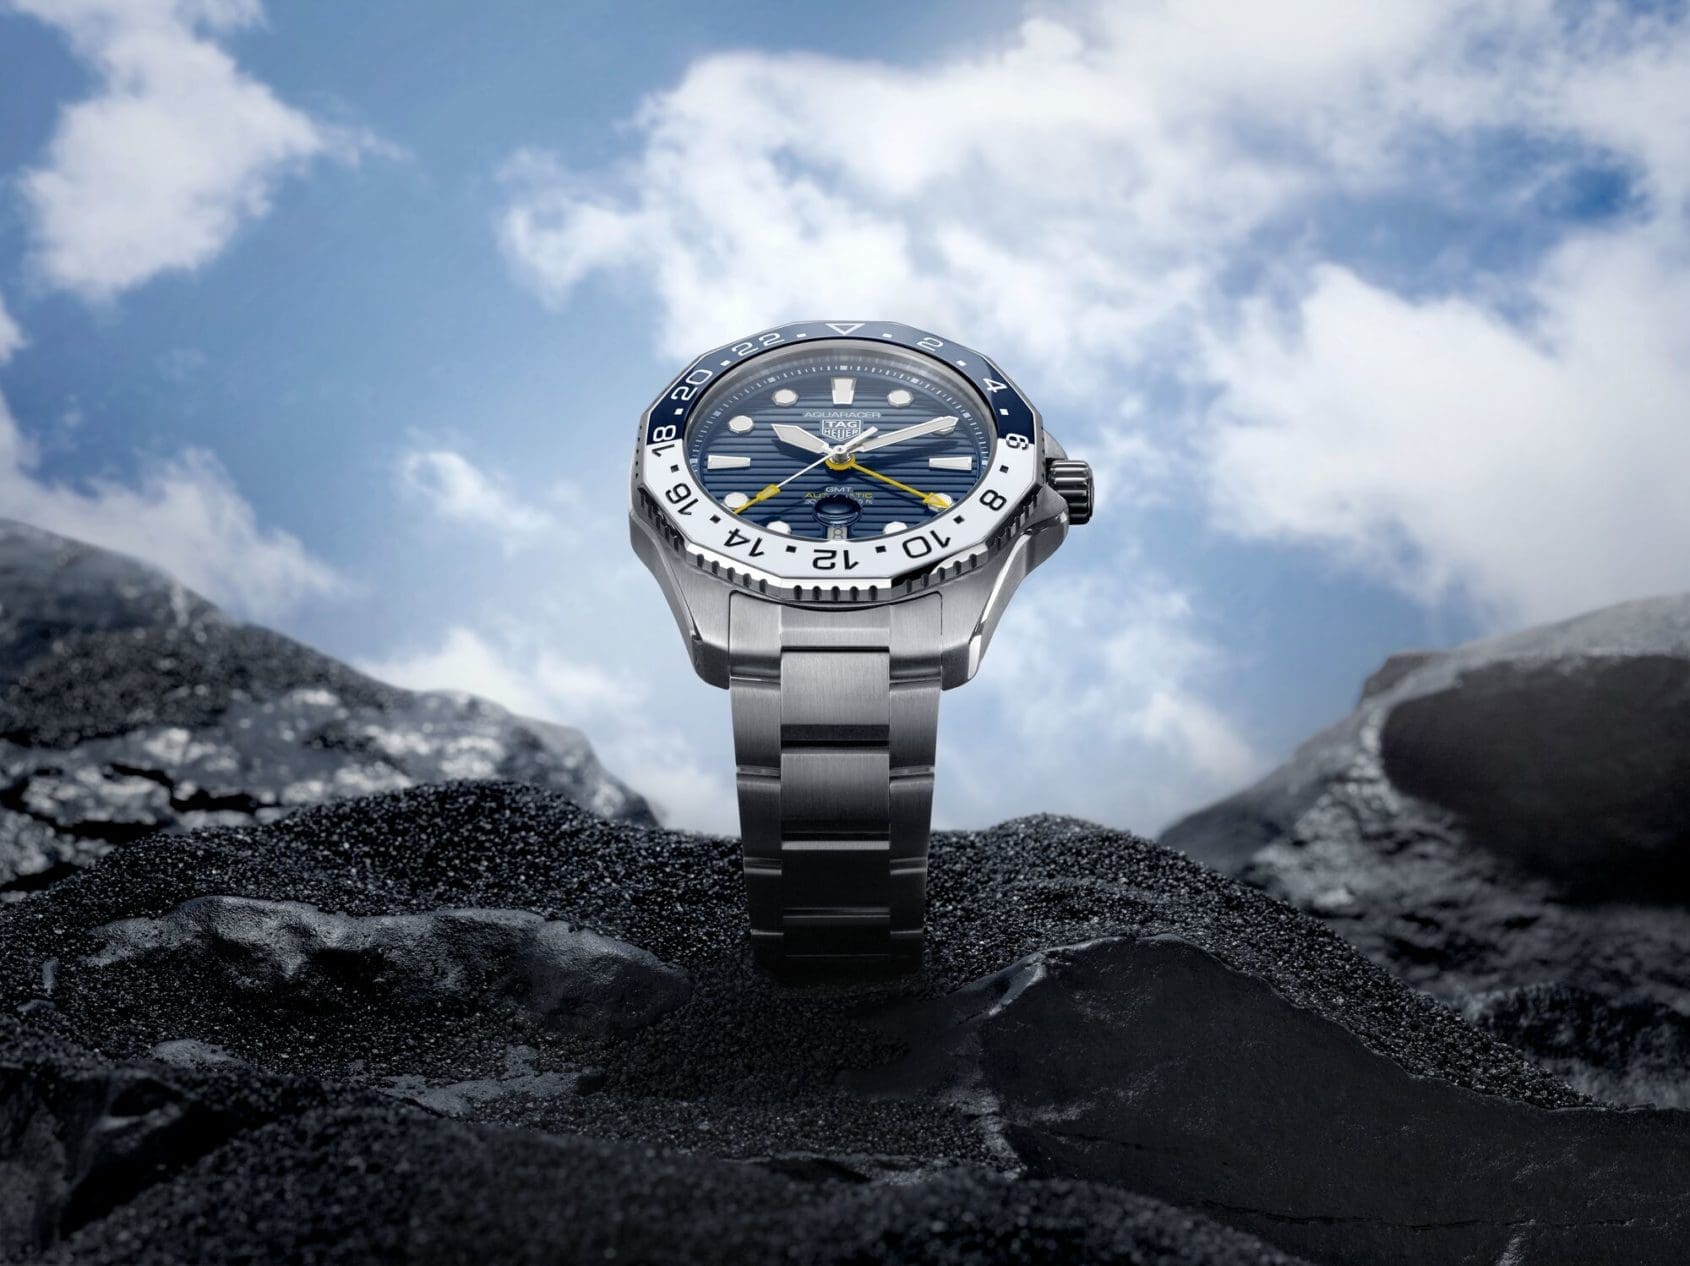 TAG Heuer adds jet-set functionality to the Aquaracer GMT